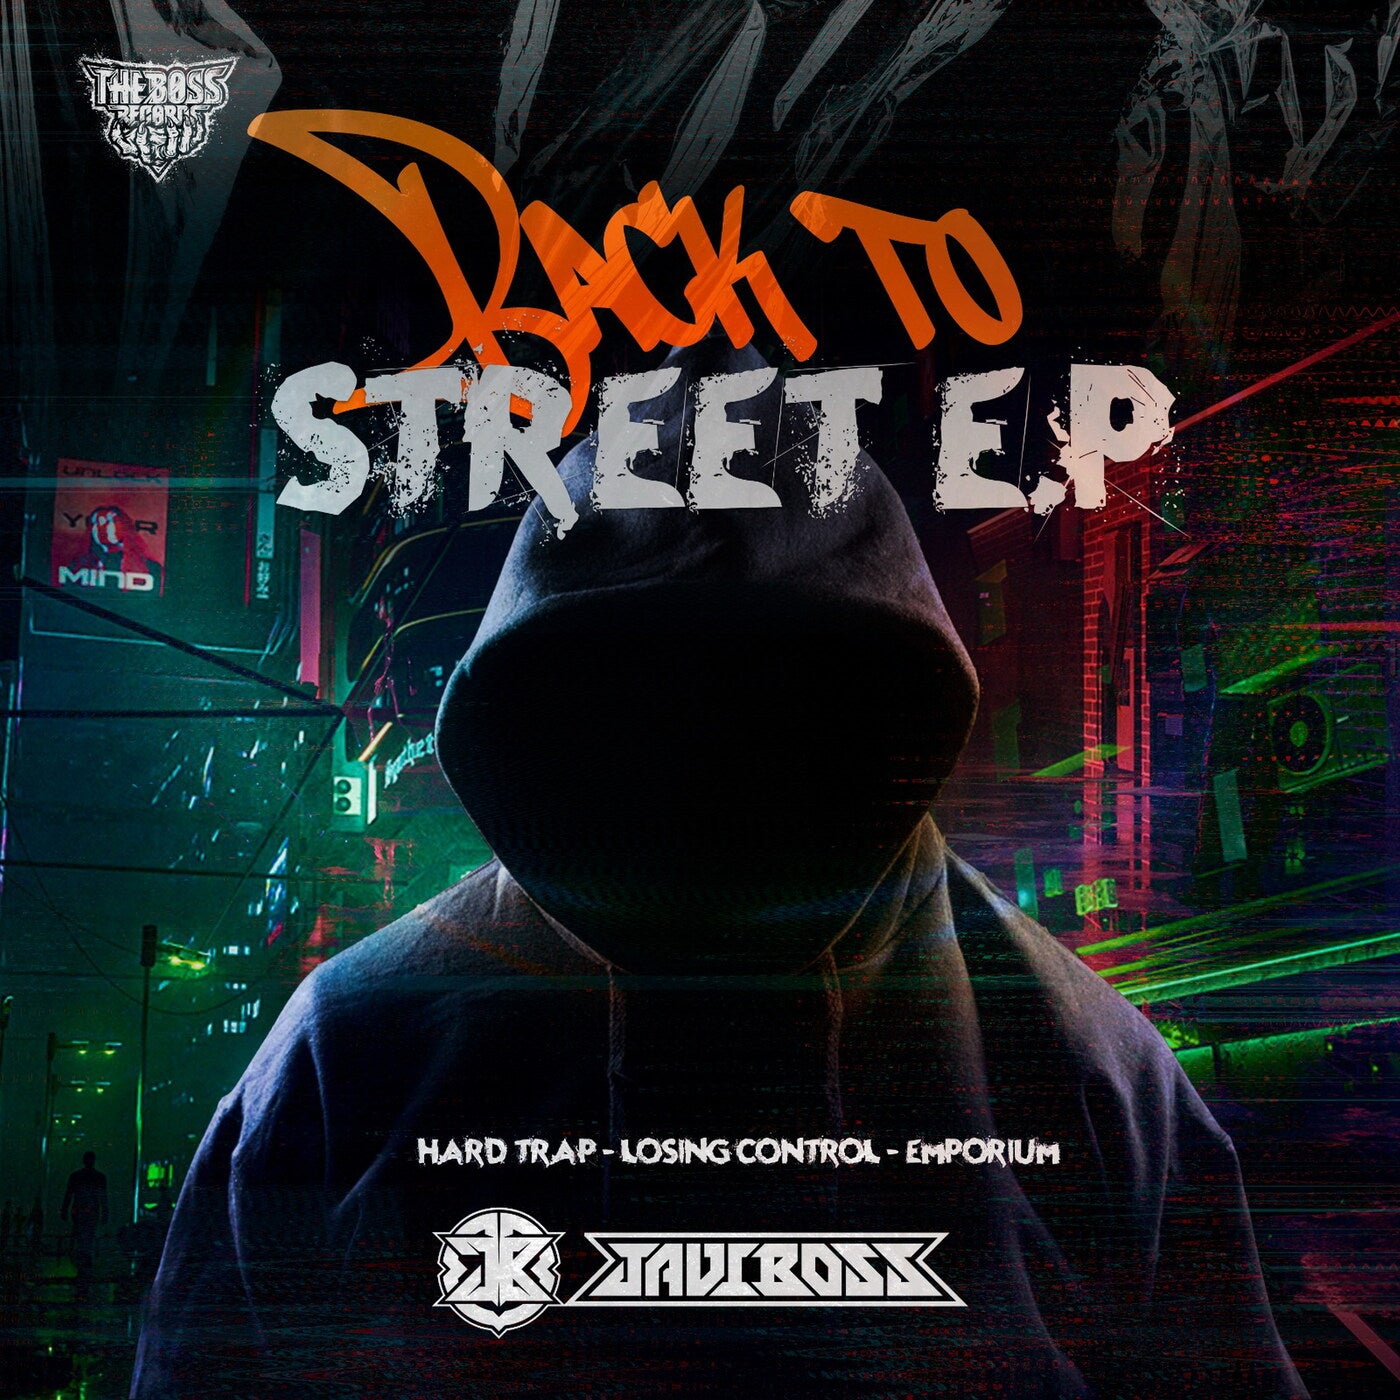 Back to Street EP